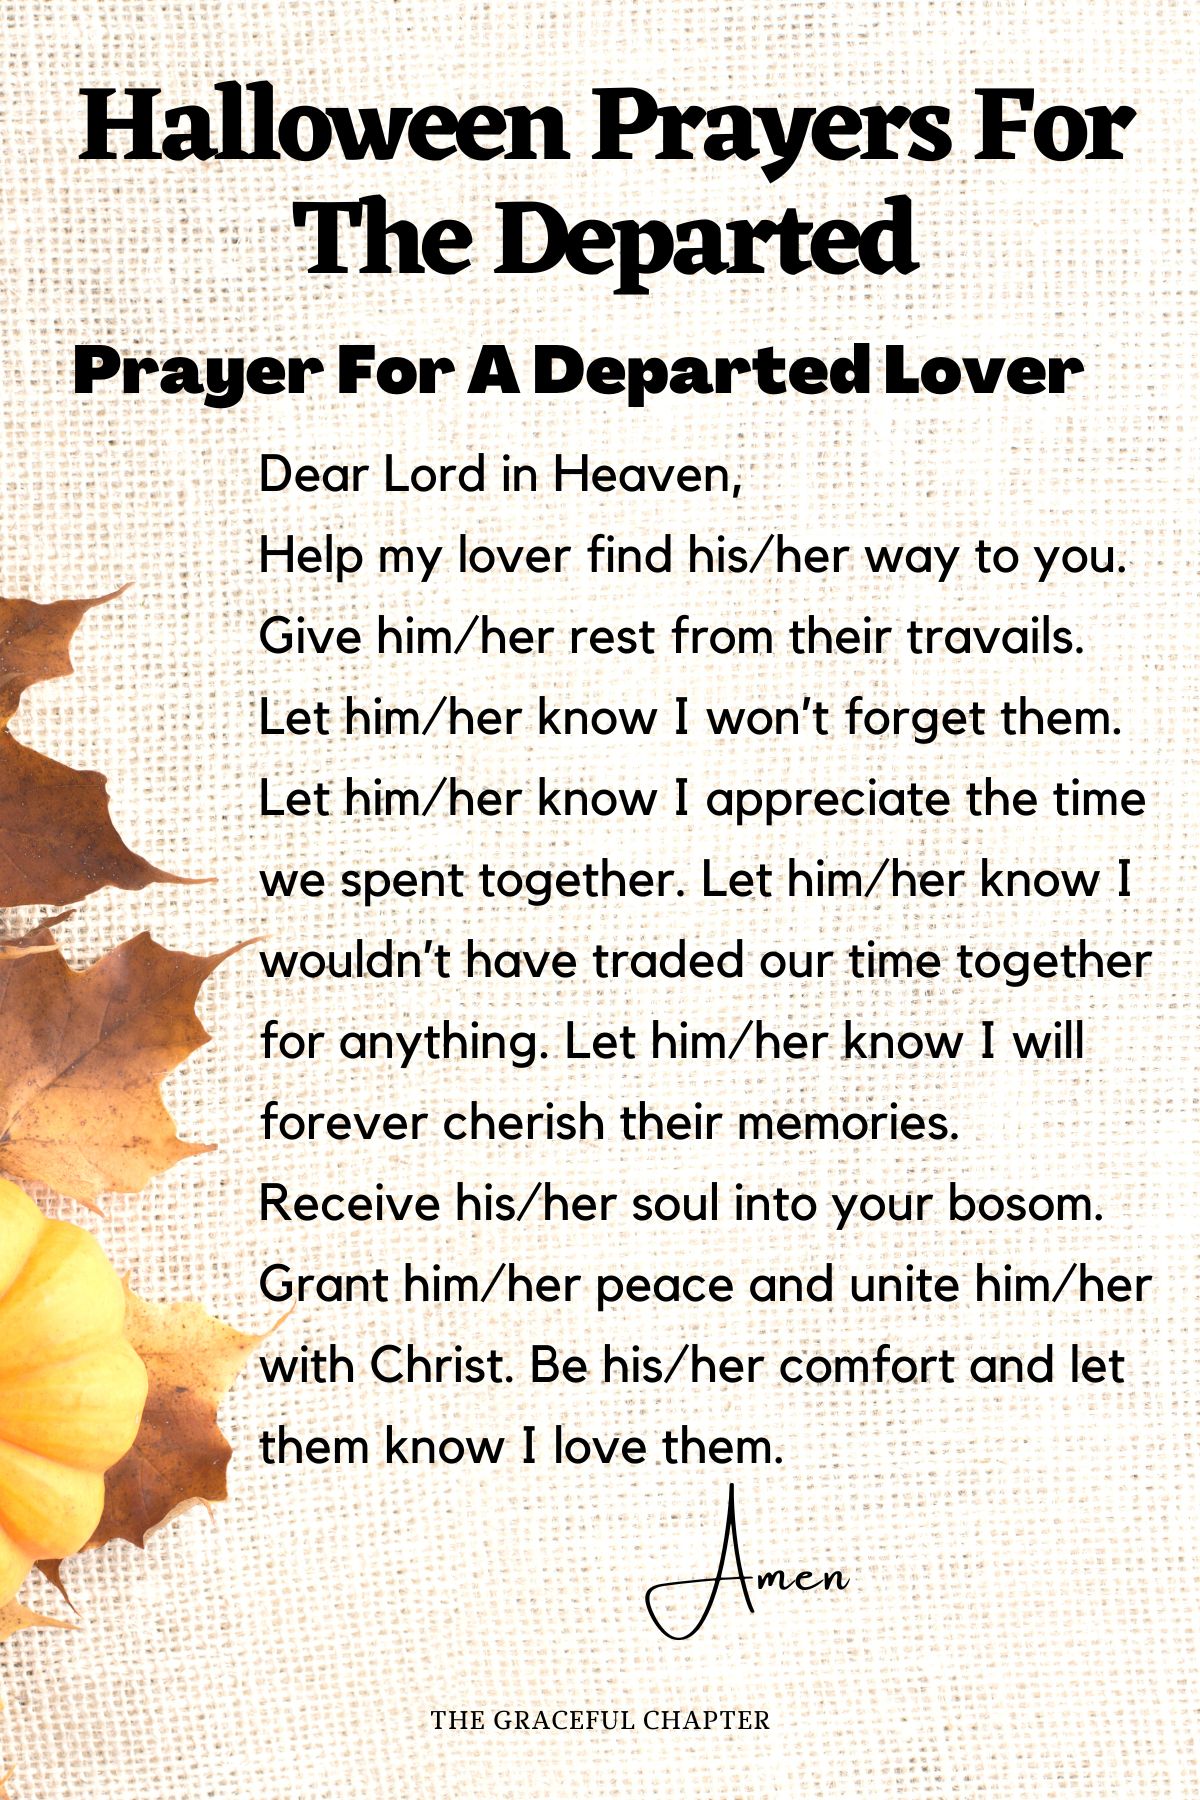 Prayer for a departed lover